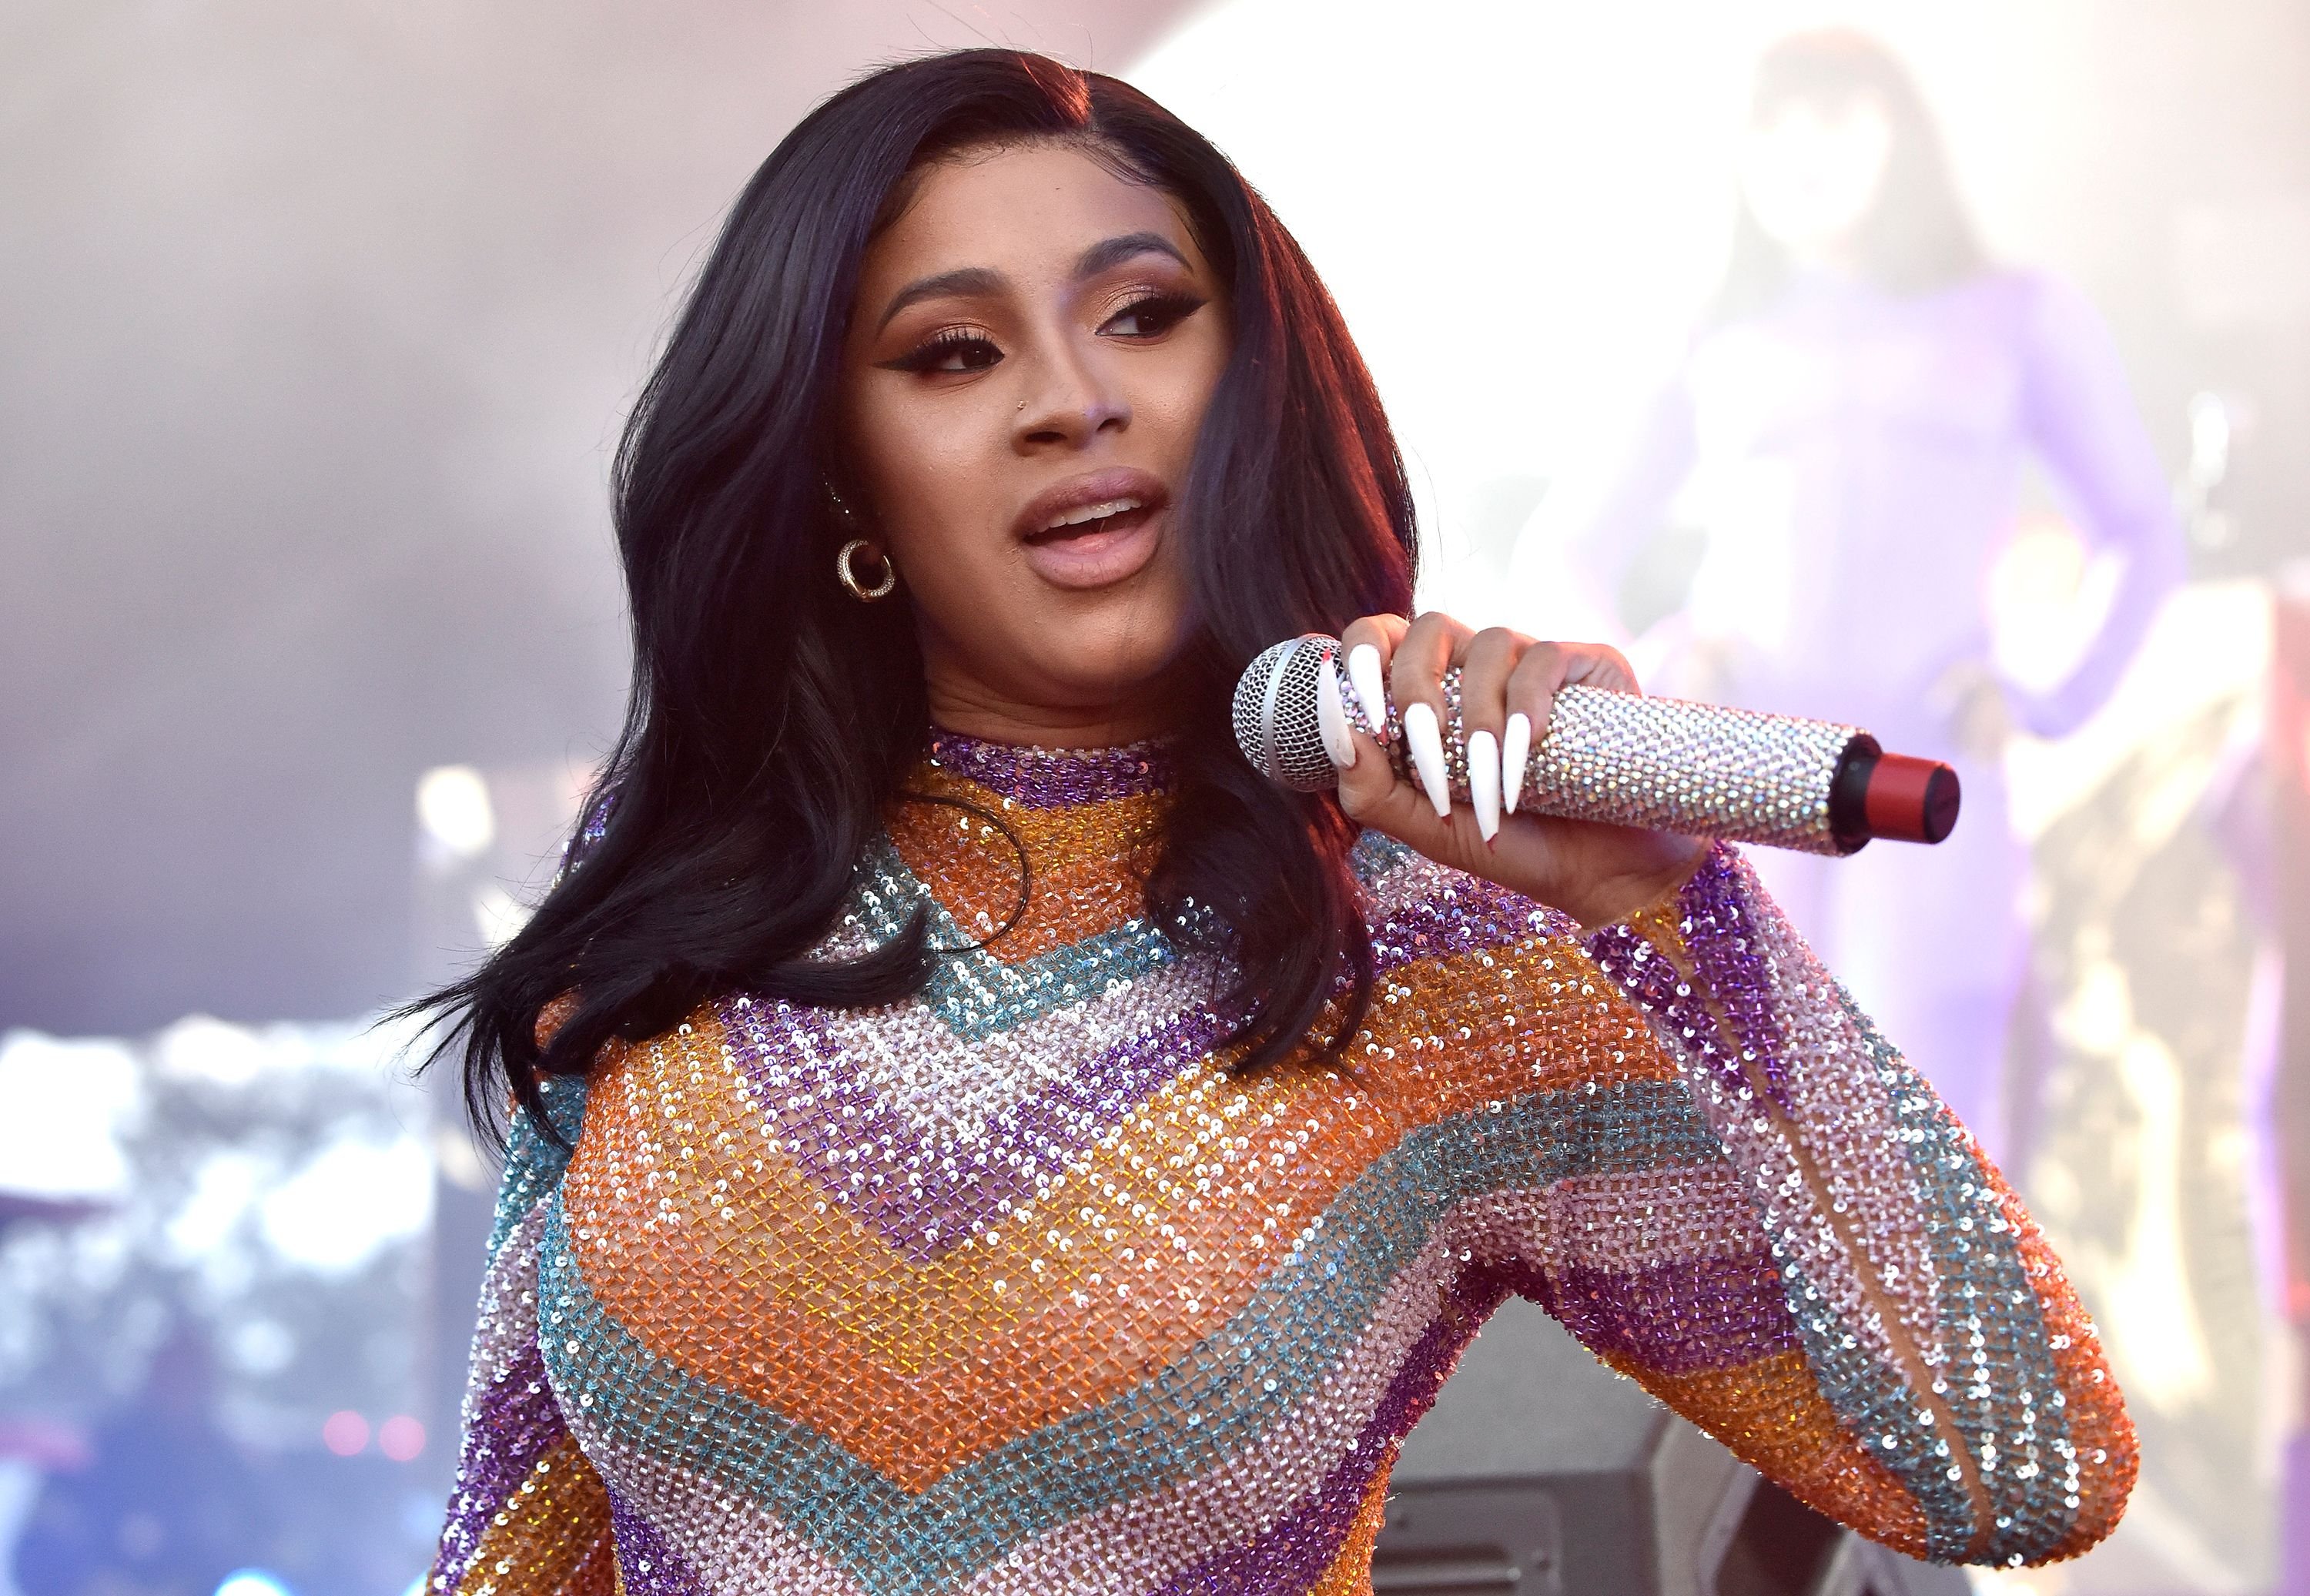 Cardi B performing at the 2019 Bonnaroo Music & Arts Festival on June 16, 2019 | Photo: Getty Images